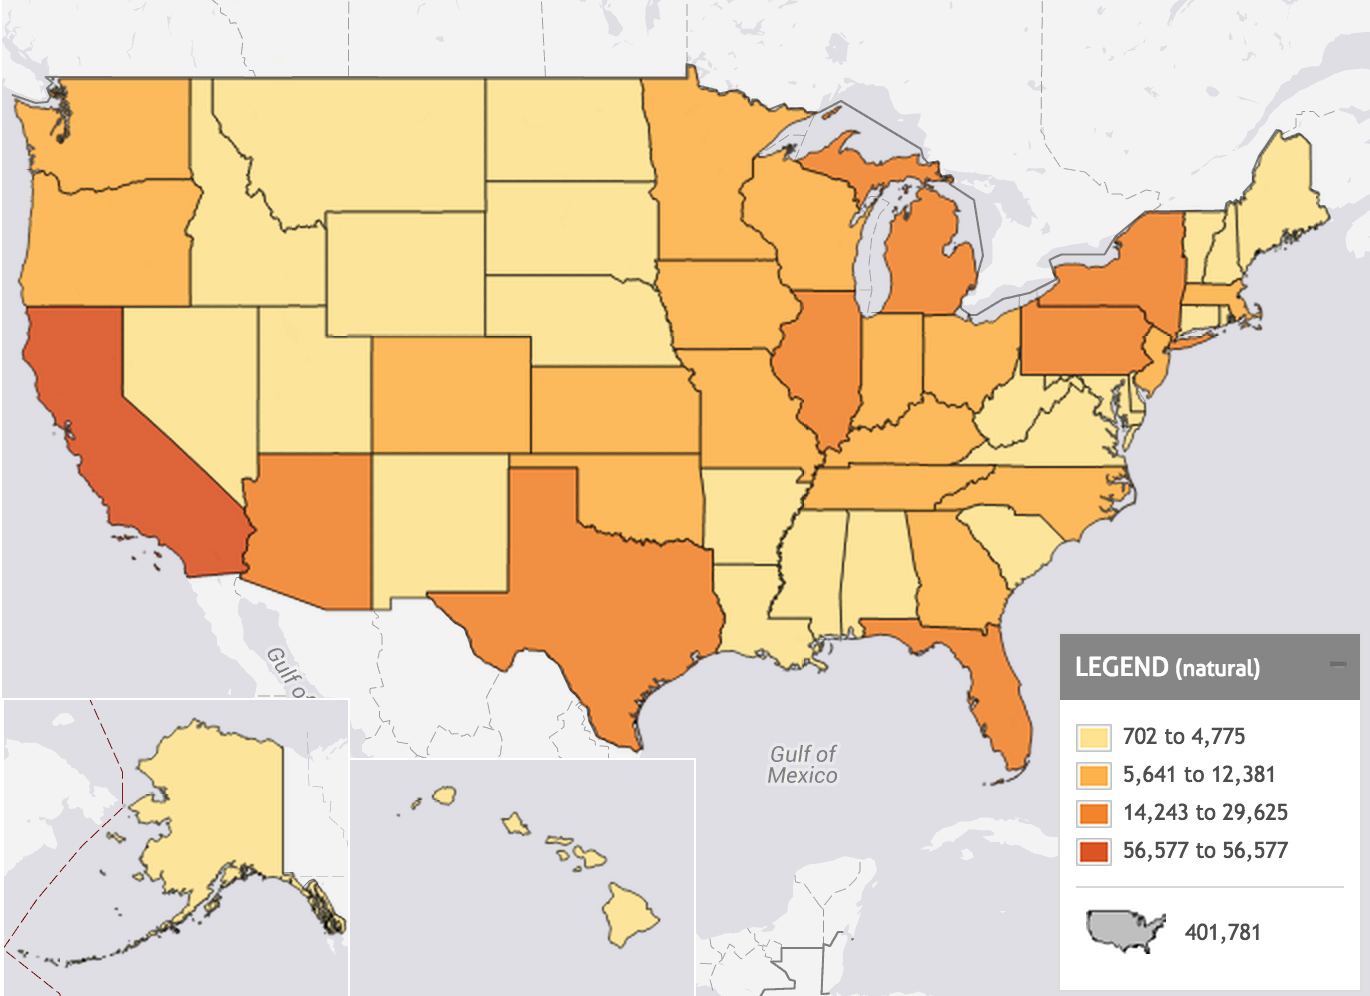 Number of Children in Foster Care (by state) Source: http://datacenter.kidscount.org/